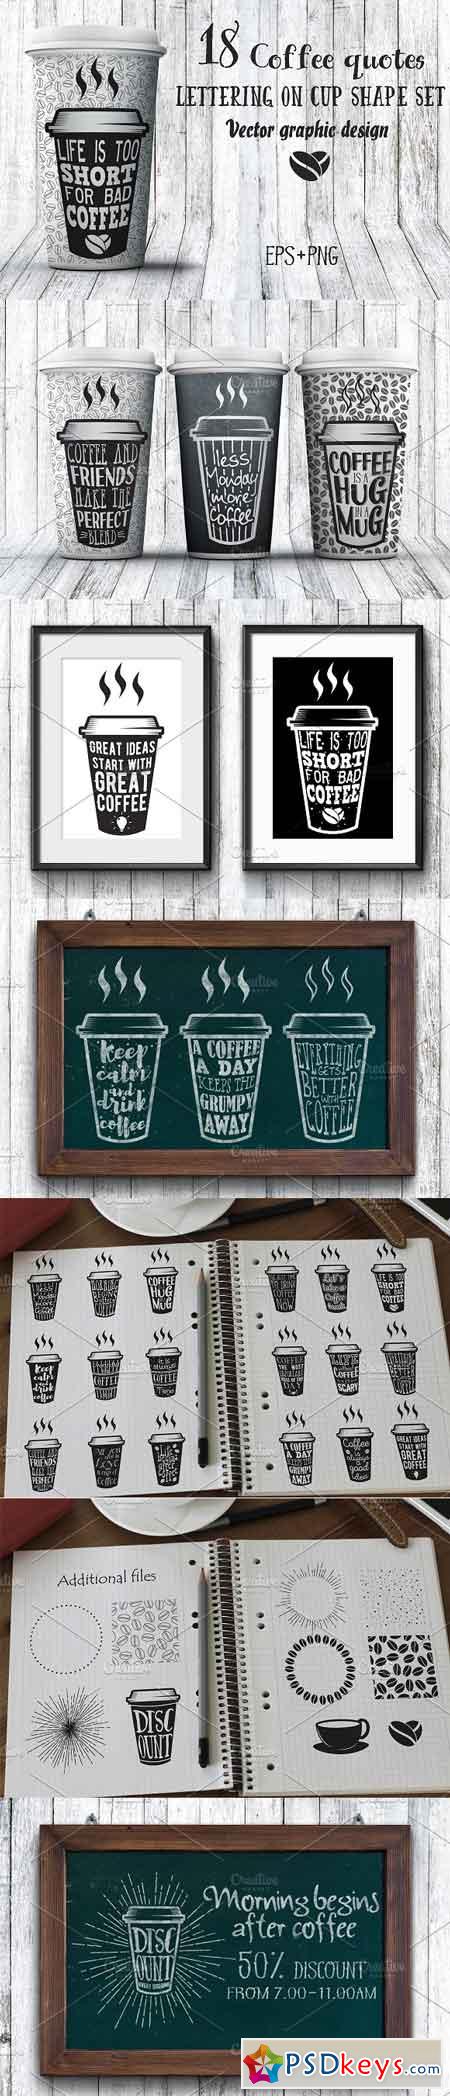 18 Coffee Quotes. Lettering on cups 1409637